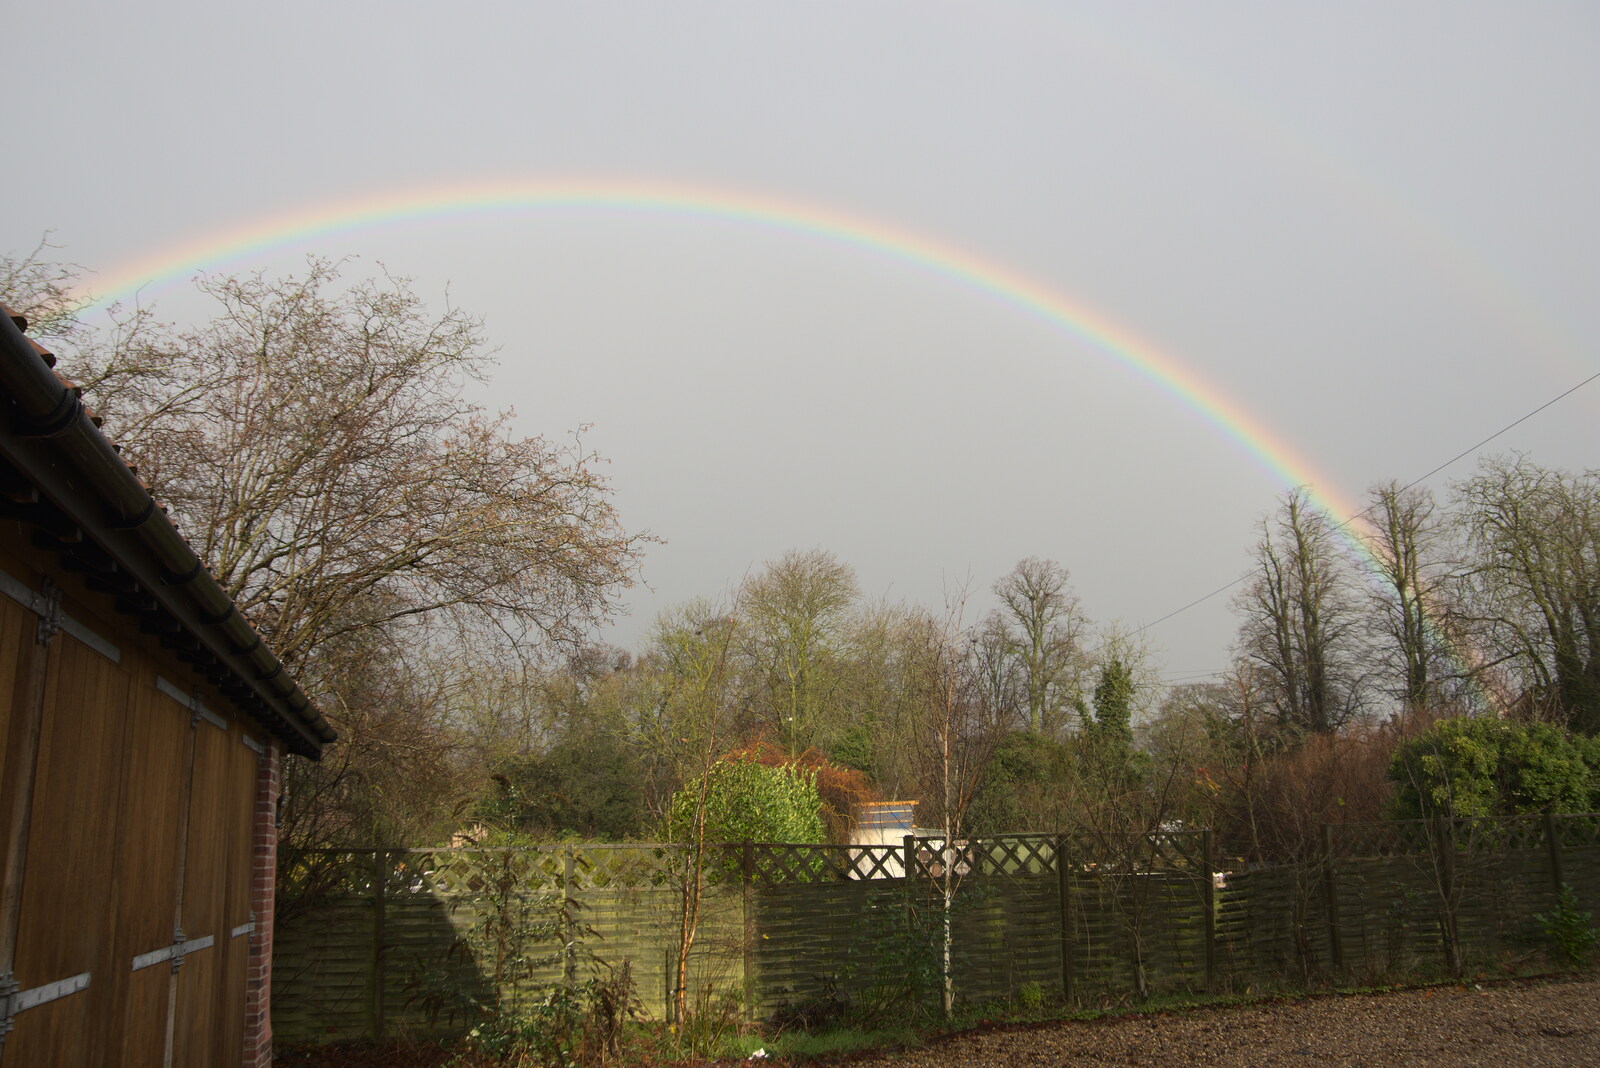 There's a rainbow over the Oaksmere from New Year's Day, Brome, Suffolk - 1st January 2022